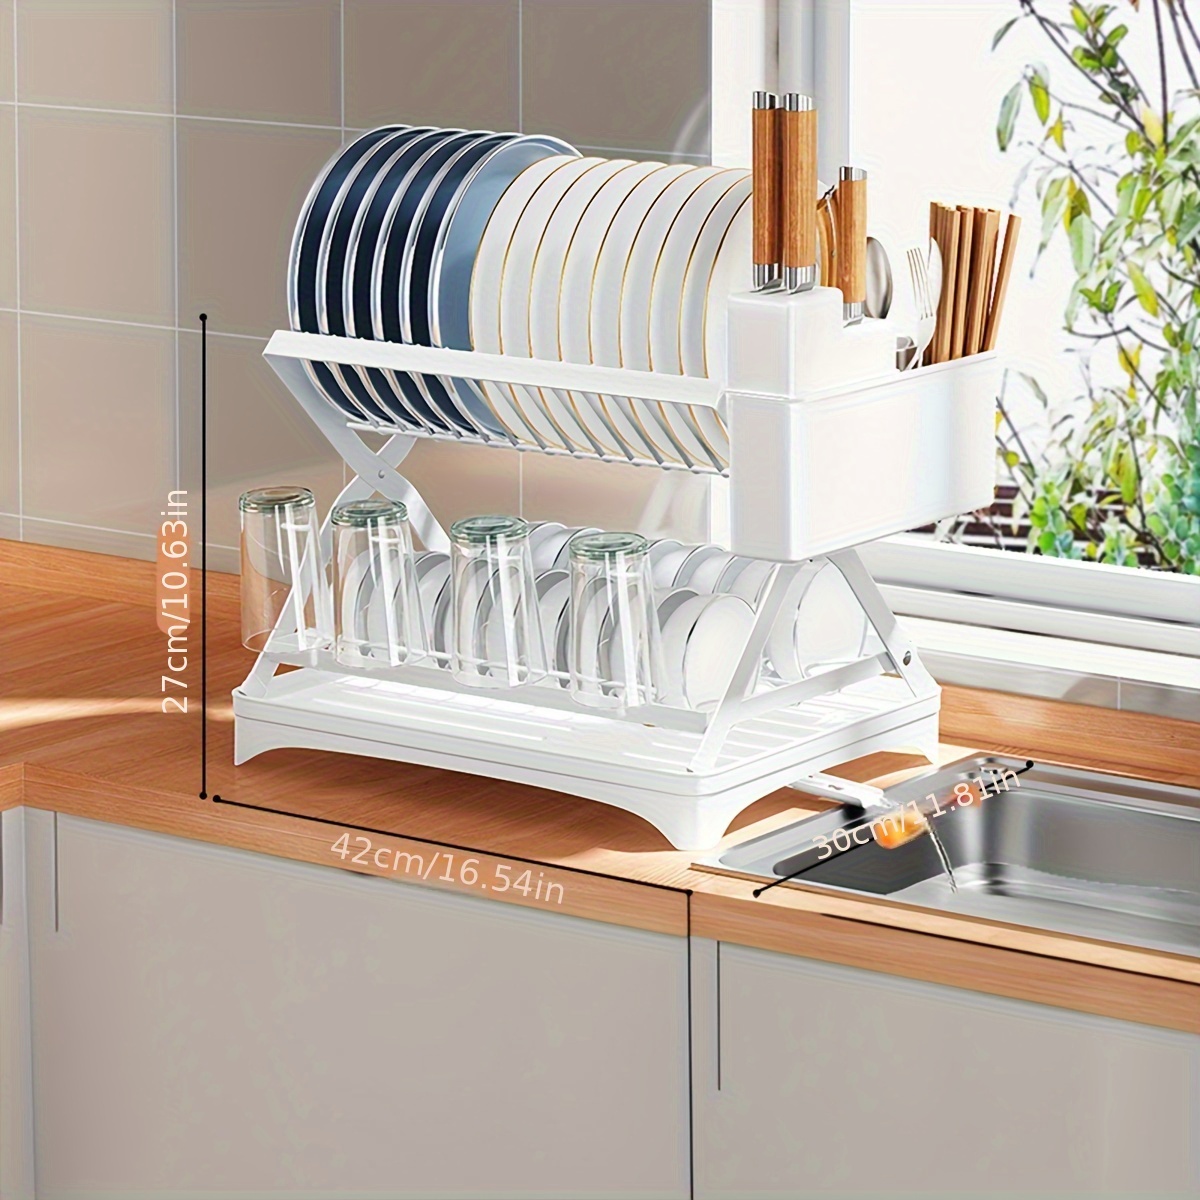 Two-Tier Dish Drying Rack - Rust Proof Stainless Steel, Self-Draining -  Ideal fo